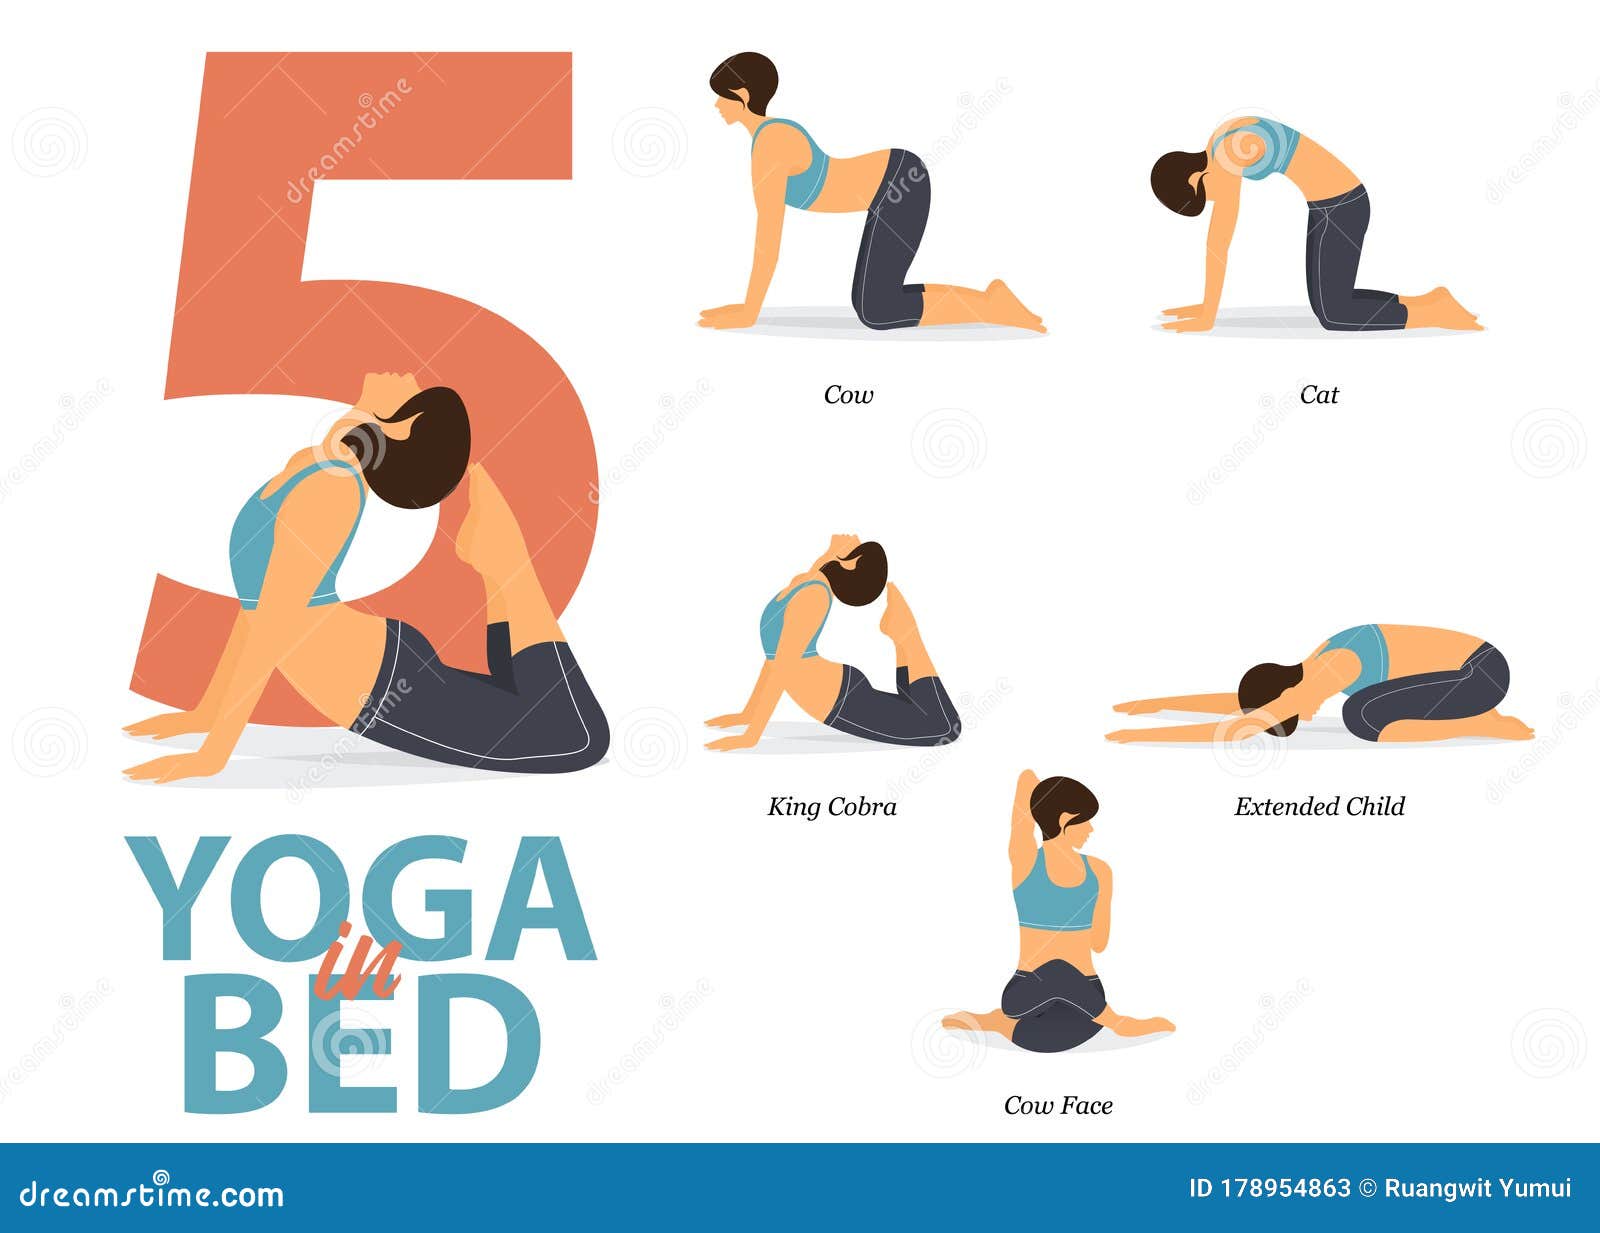 10 Simple Yoga Poses That Will Help You Attain a Healthy Lifestyle -  HubPages